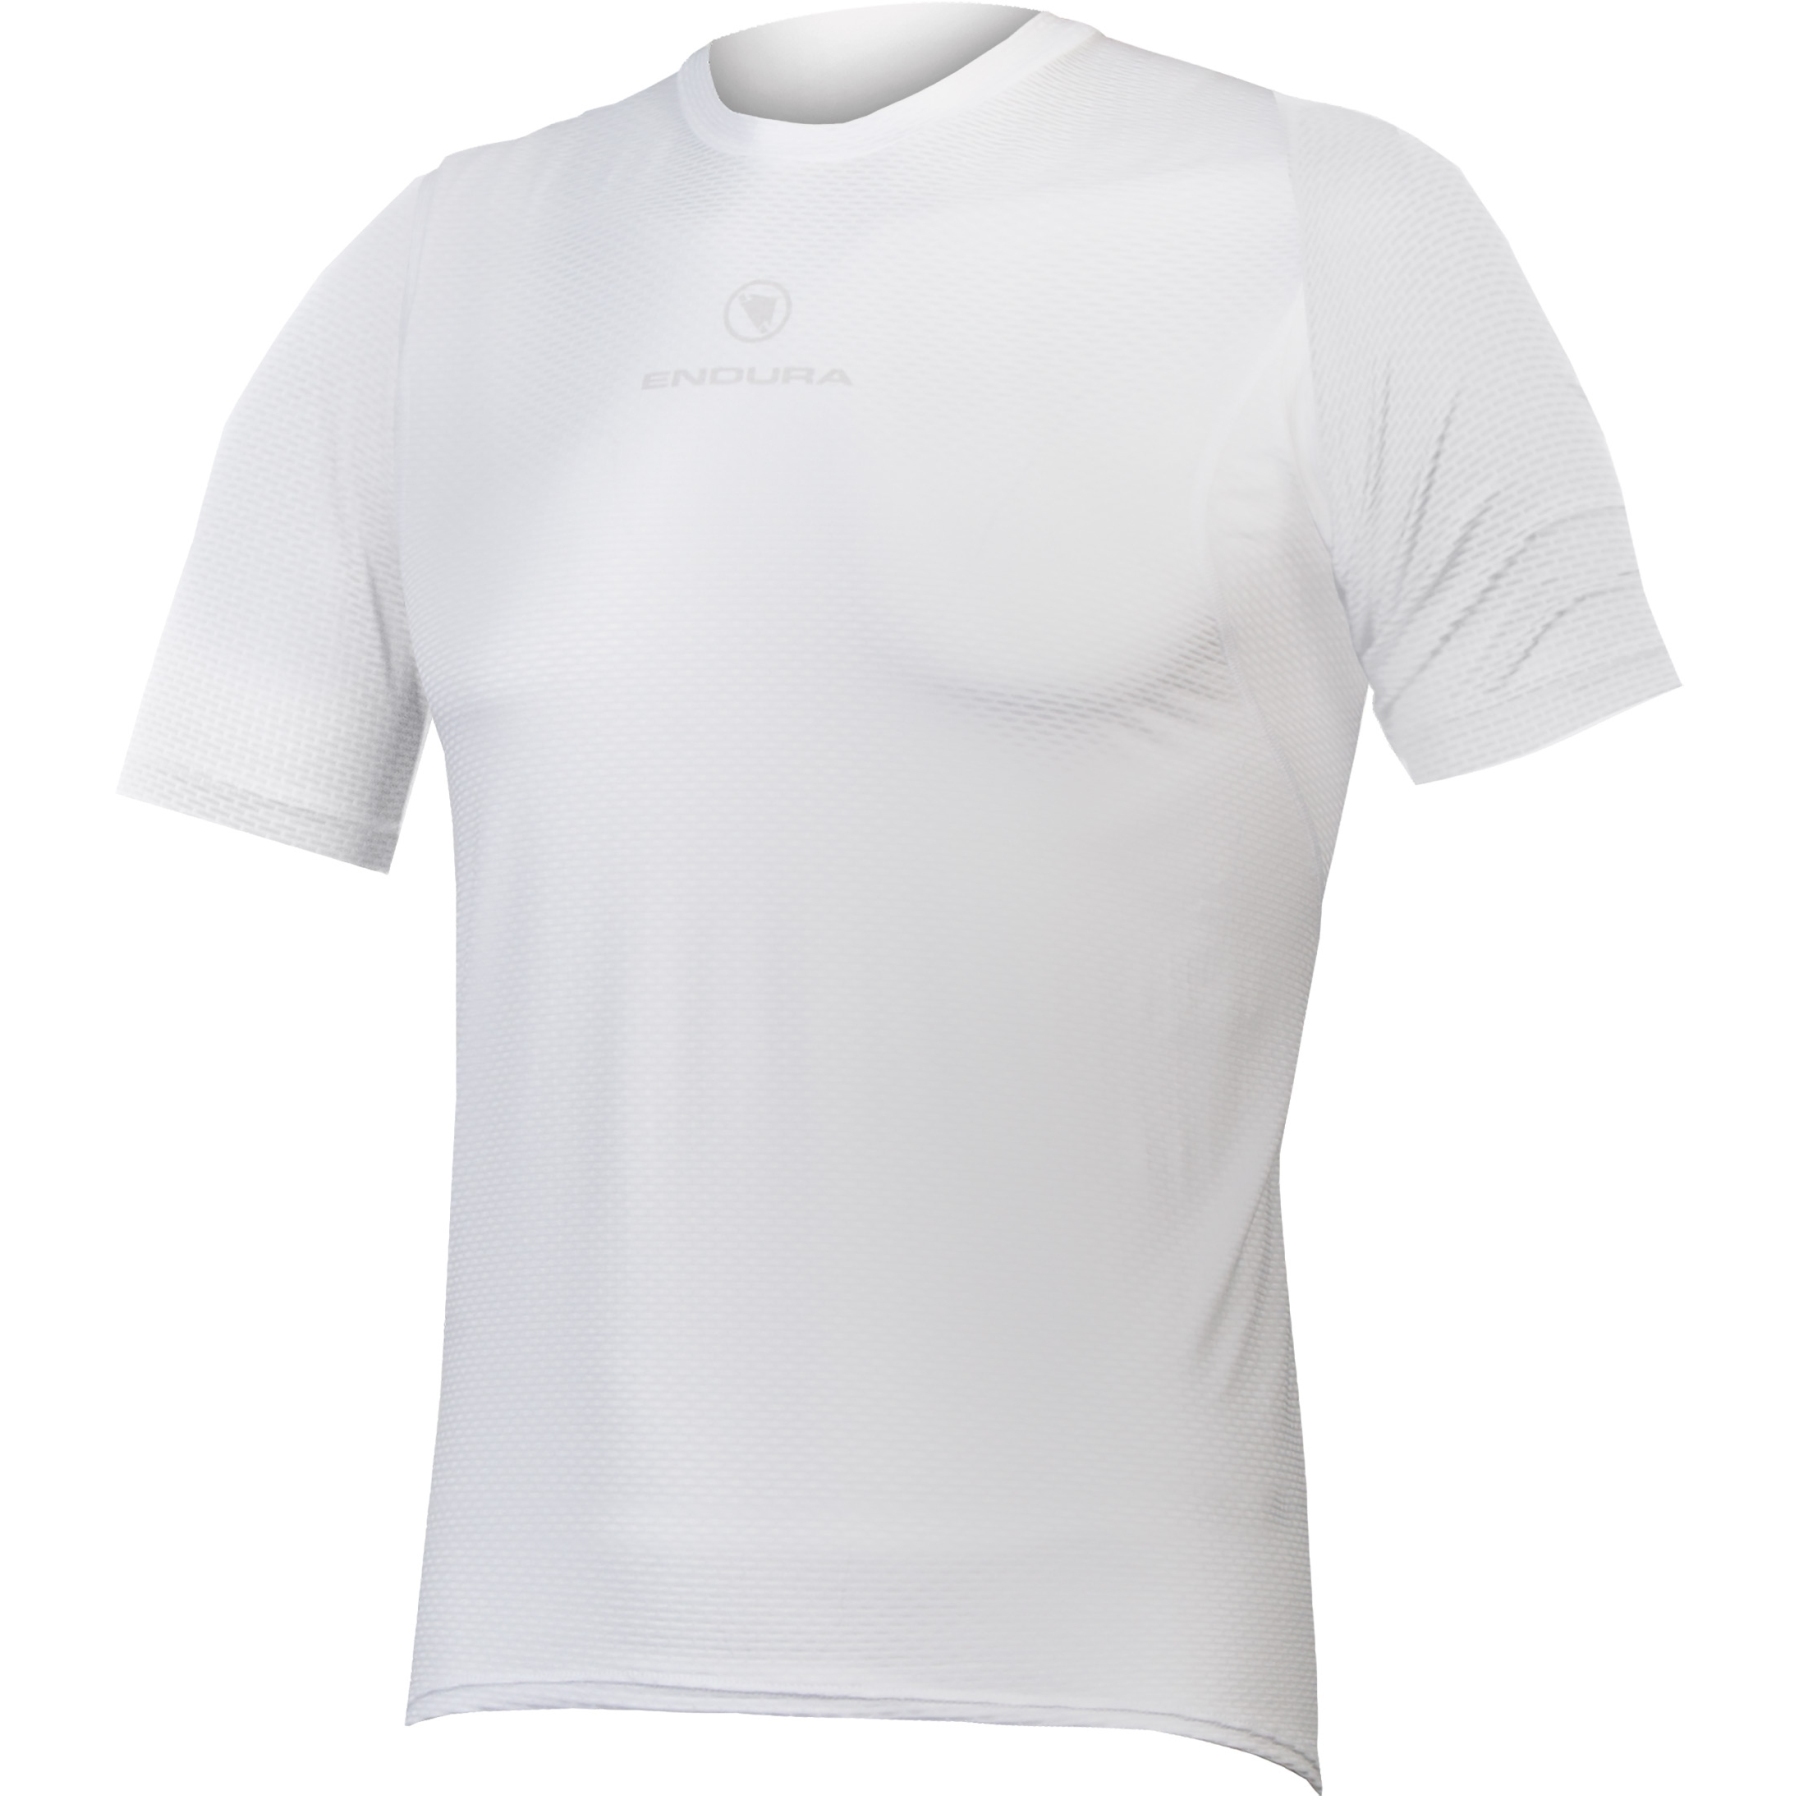 Picture of Endura Lightweight S/S Baselayer - white